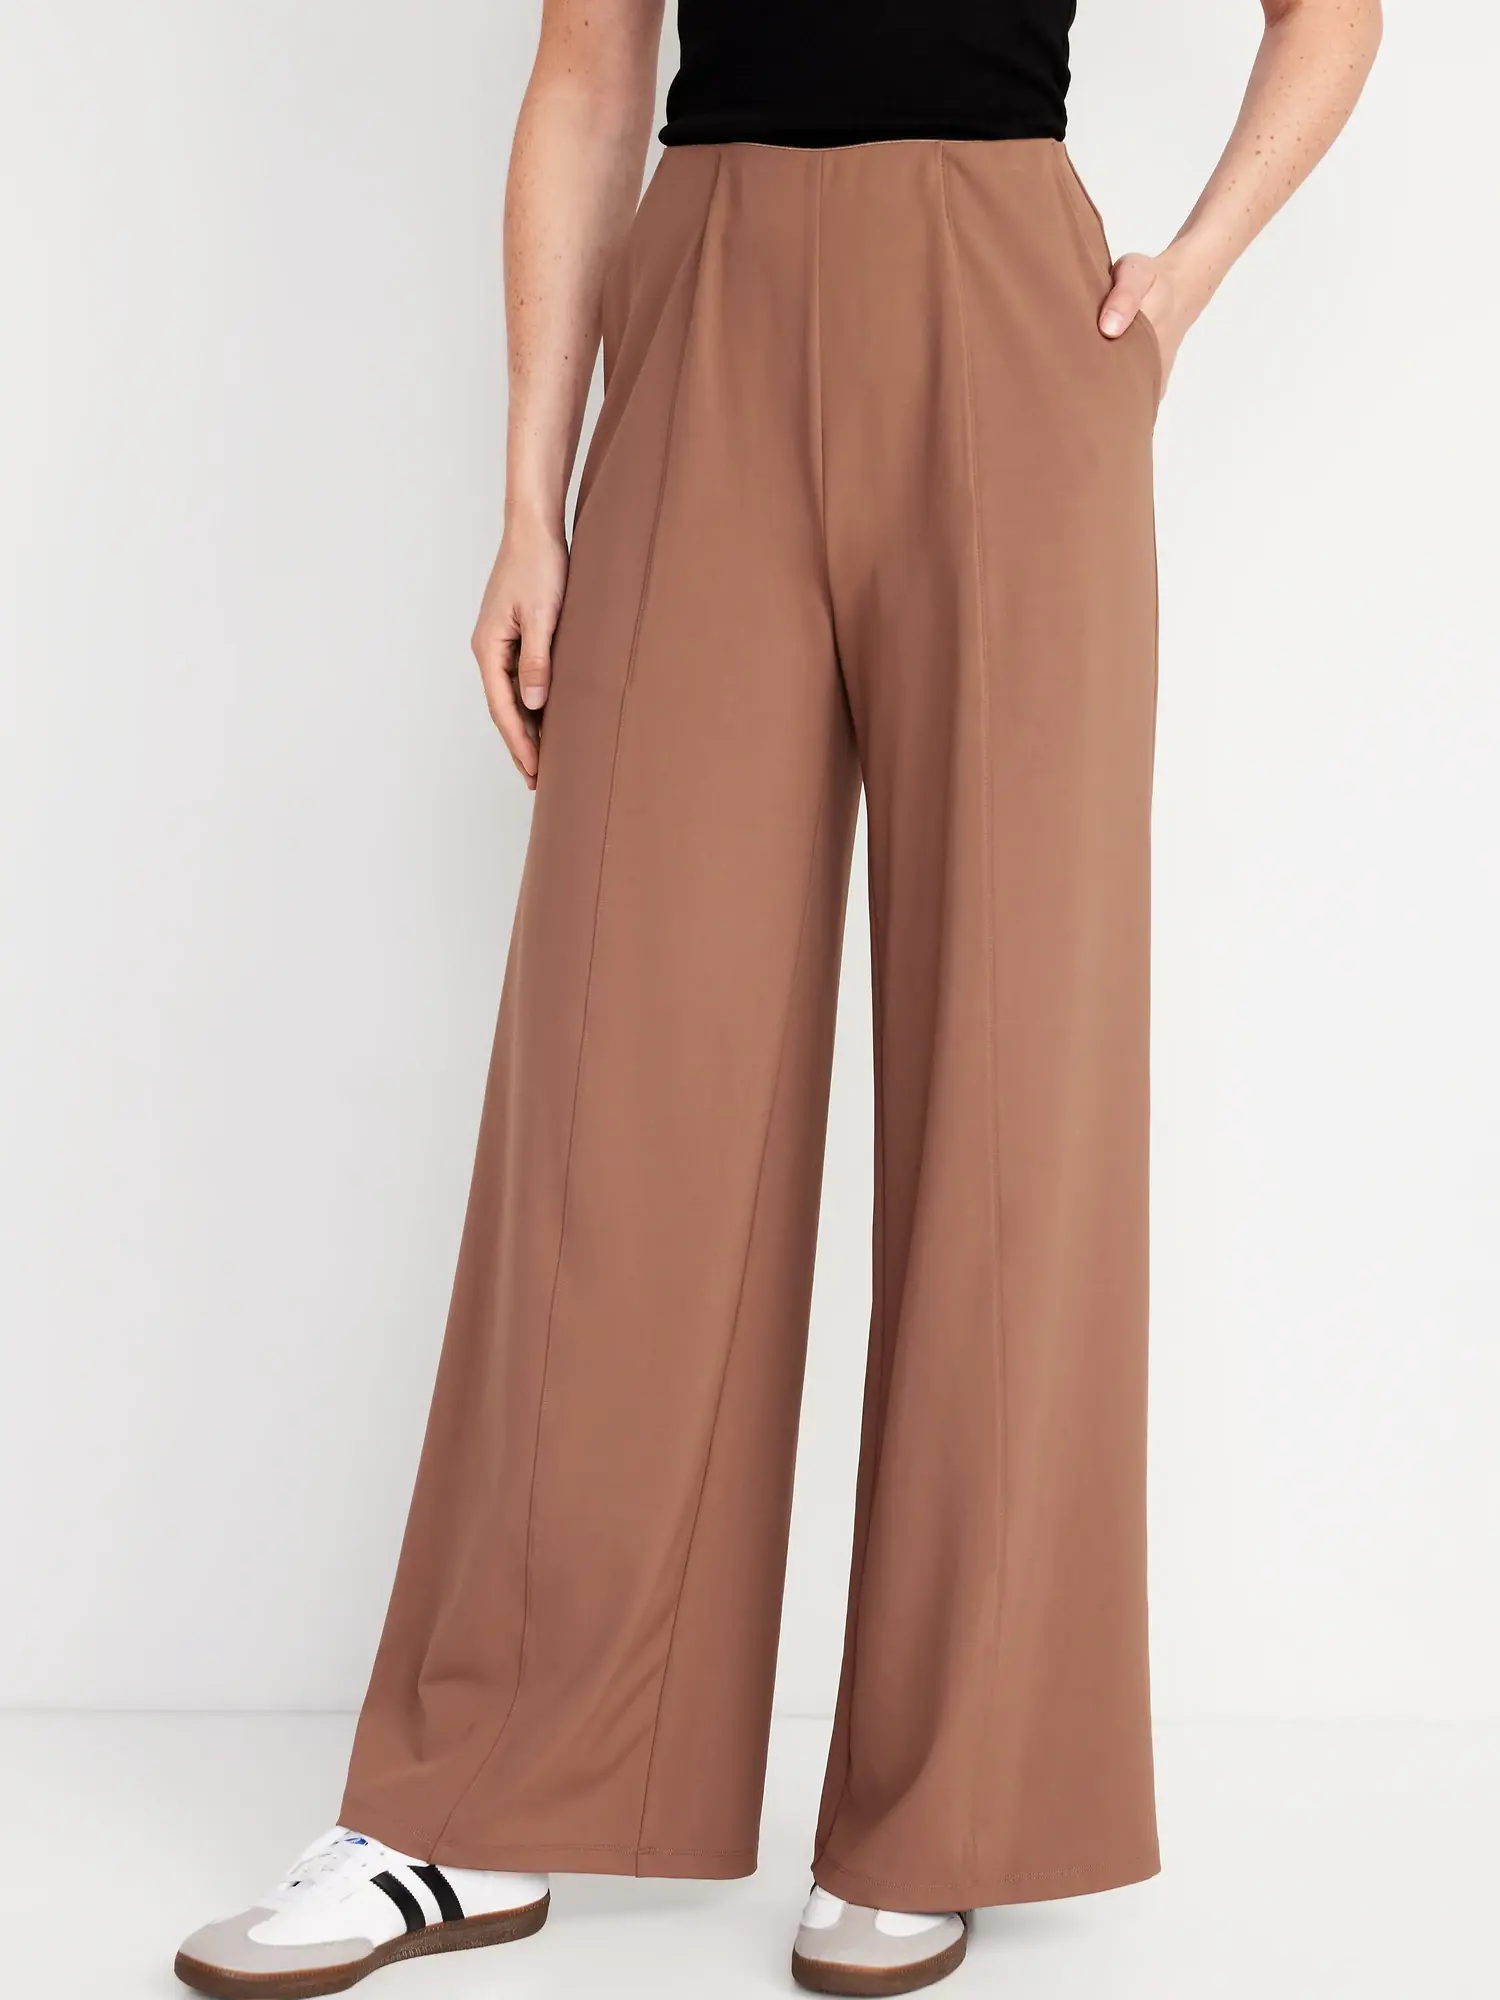 Old Navy High-Waisted PowerSoft Wide-Leg Pants for Women brown. 1